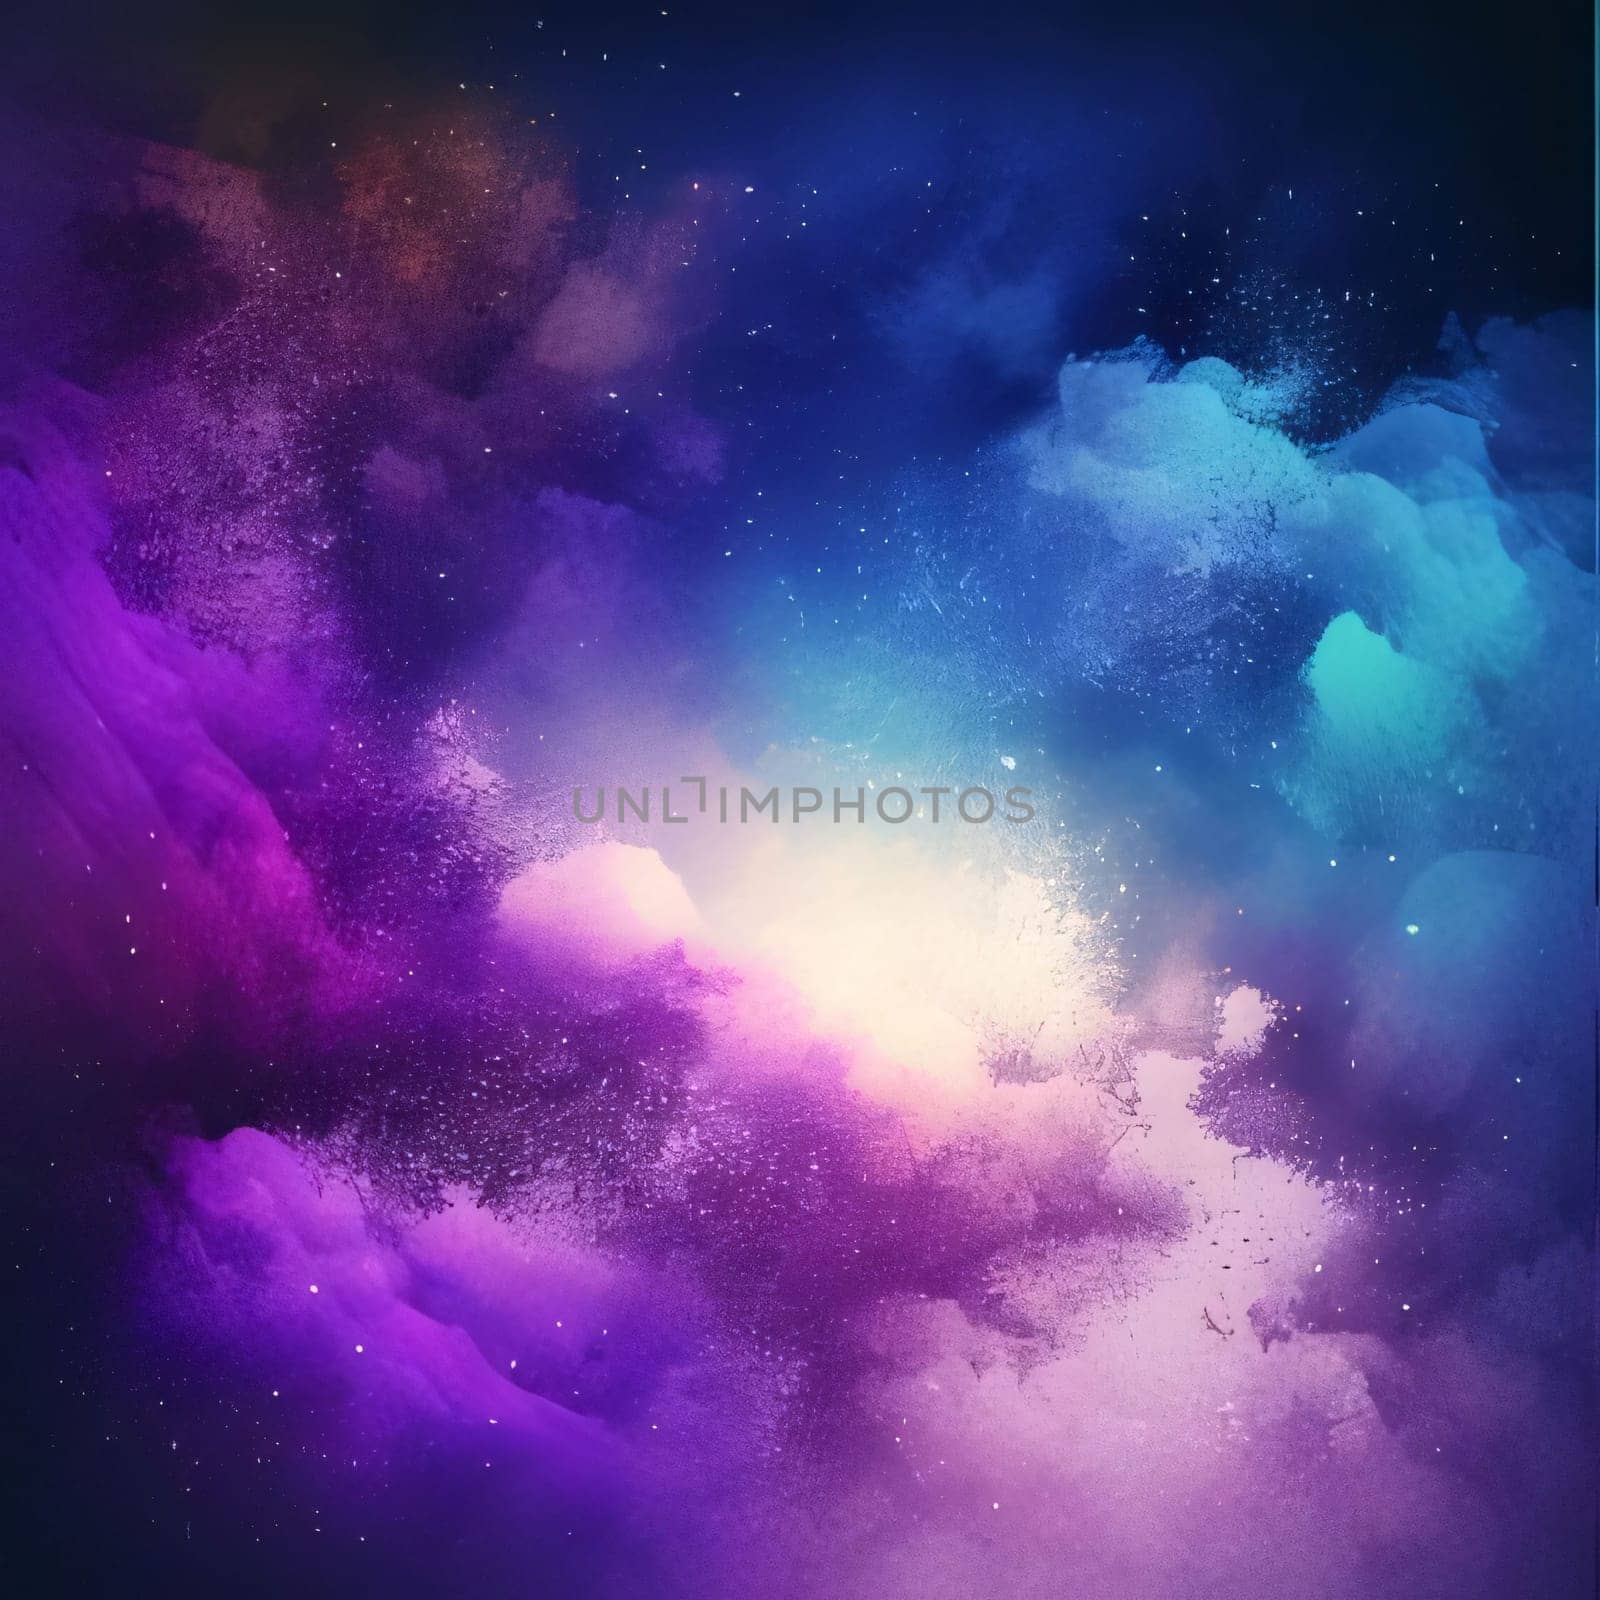 Abstract background design: abstract galaxy background with stars and nebula in purple and blue